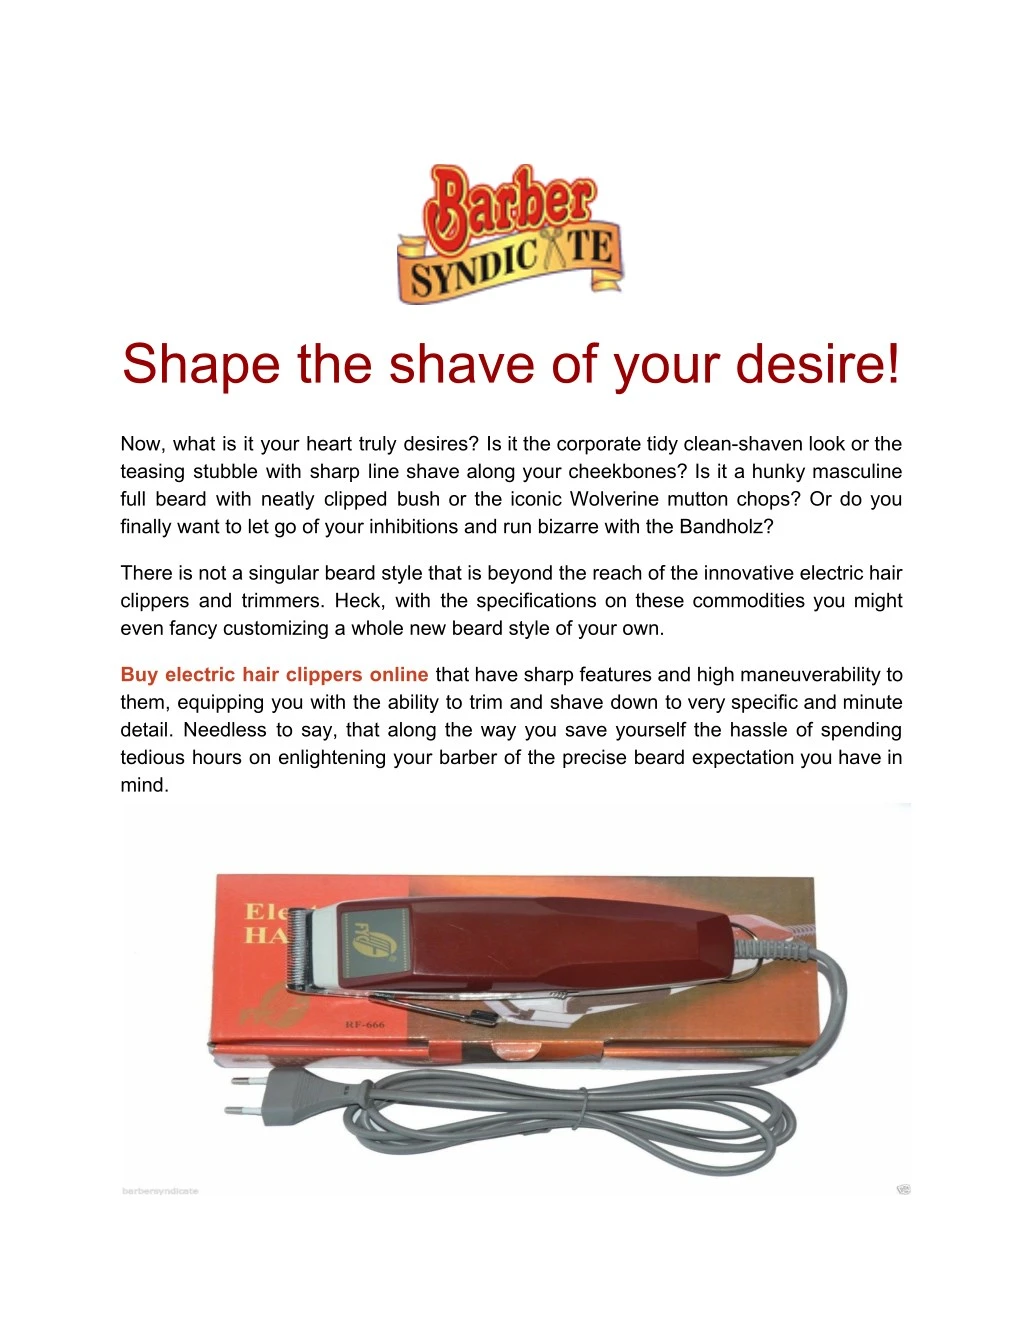 shape the shave of your desire